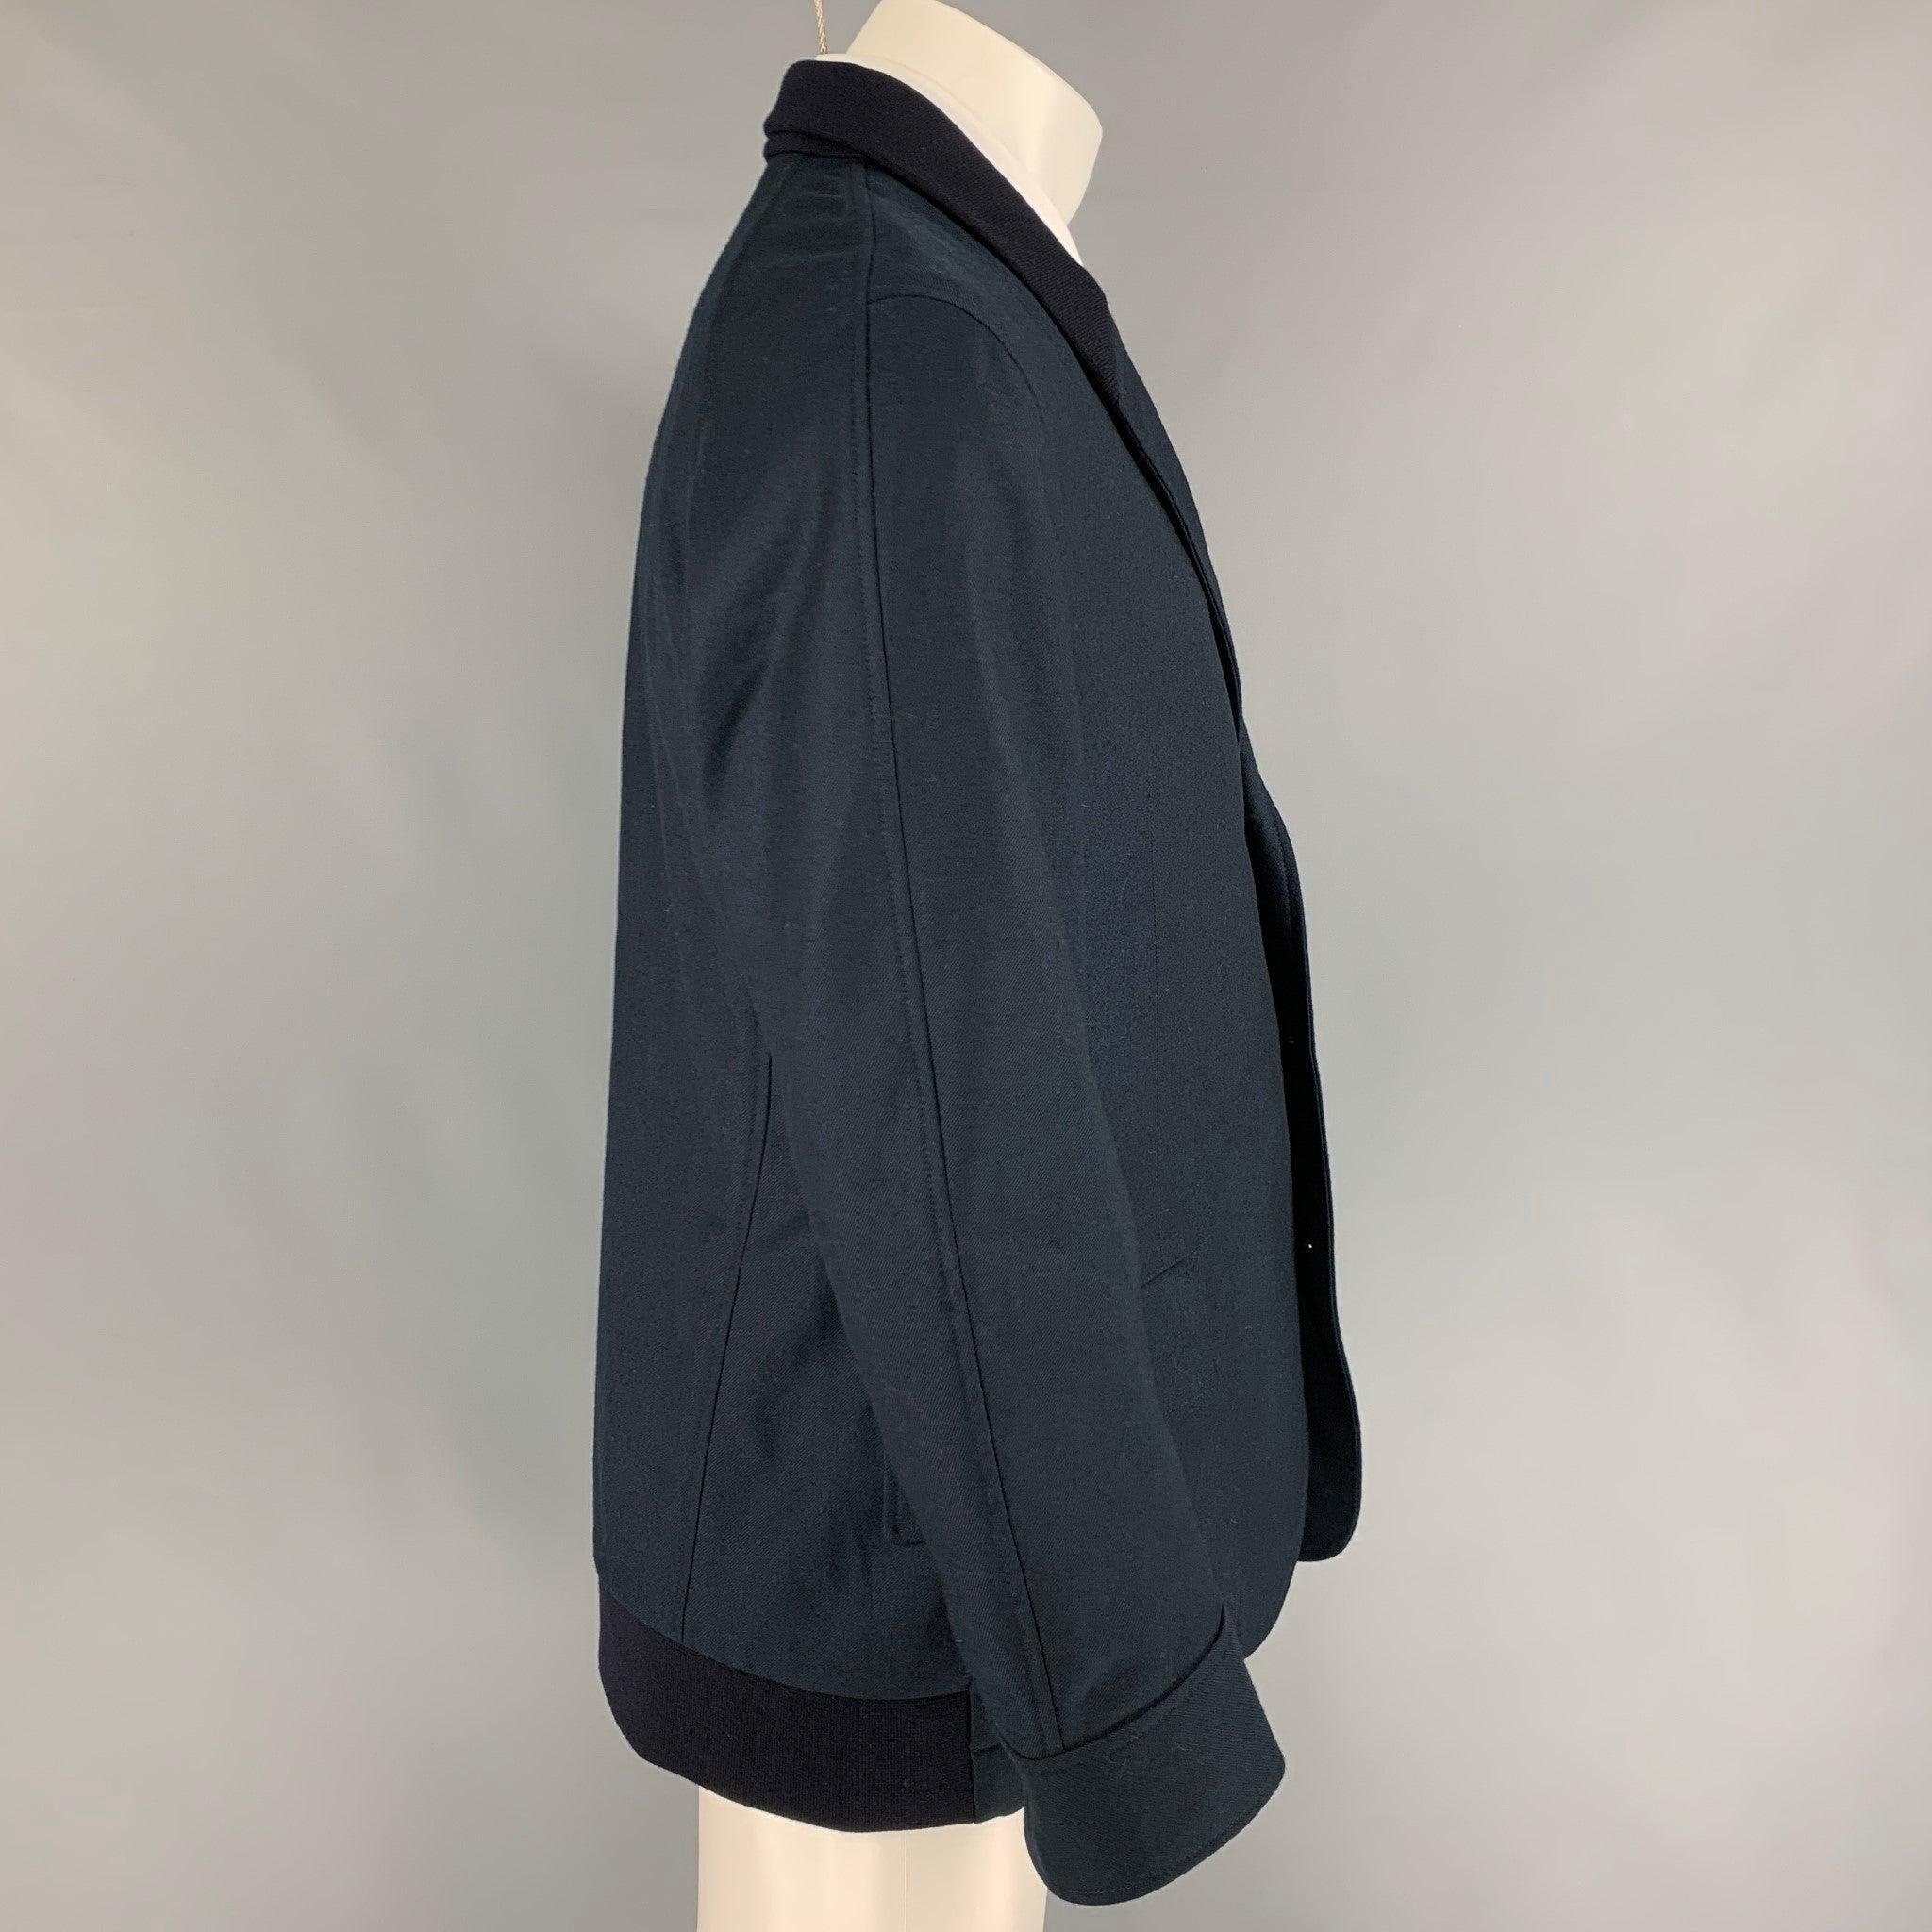 ALEXANDER McQUEEN sport coat comes in a navy wool featuring a hybrid jacket design, ribbed collar, flap pockets, and a three button closure. Made in Italy.
Excellent
Pre-Owned Condition.  

Marked:   54 

Measurements: 
 
Shoulder: 18.5 inches 